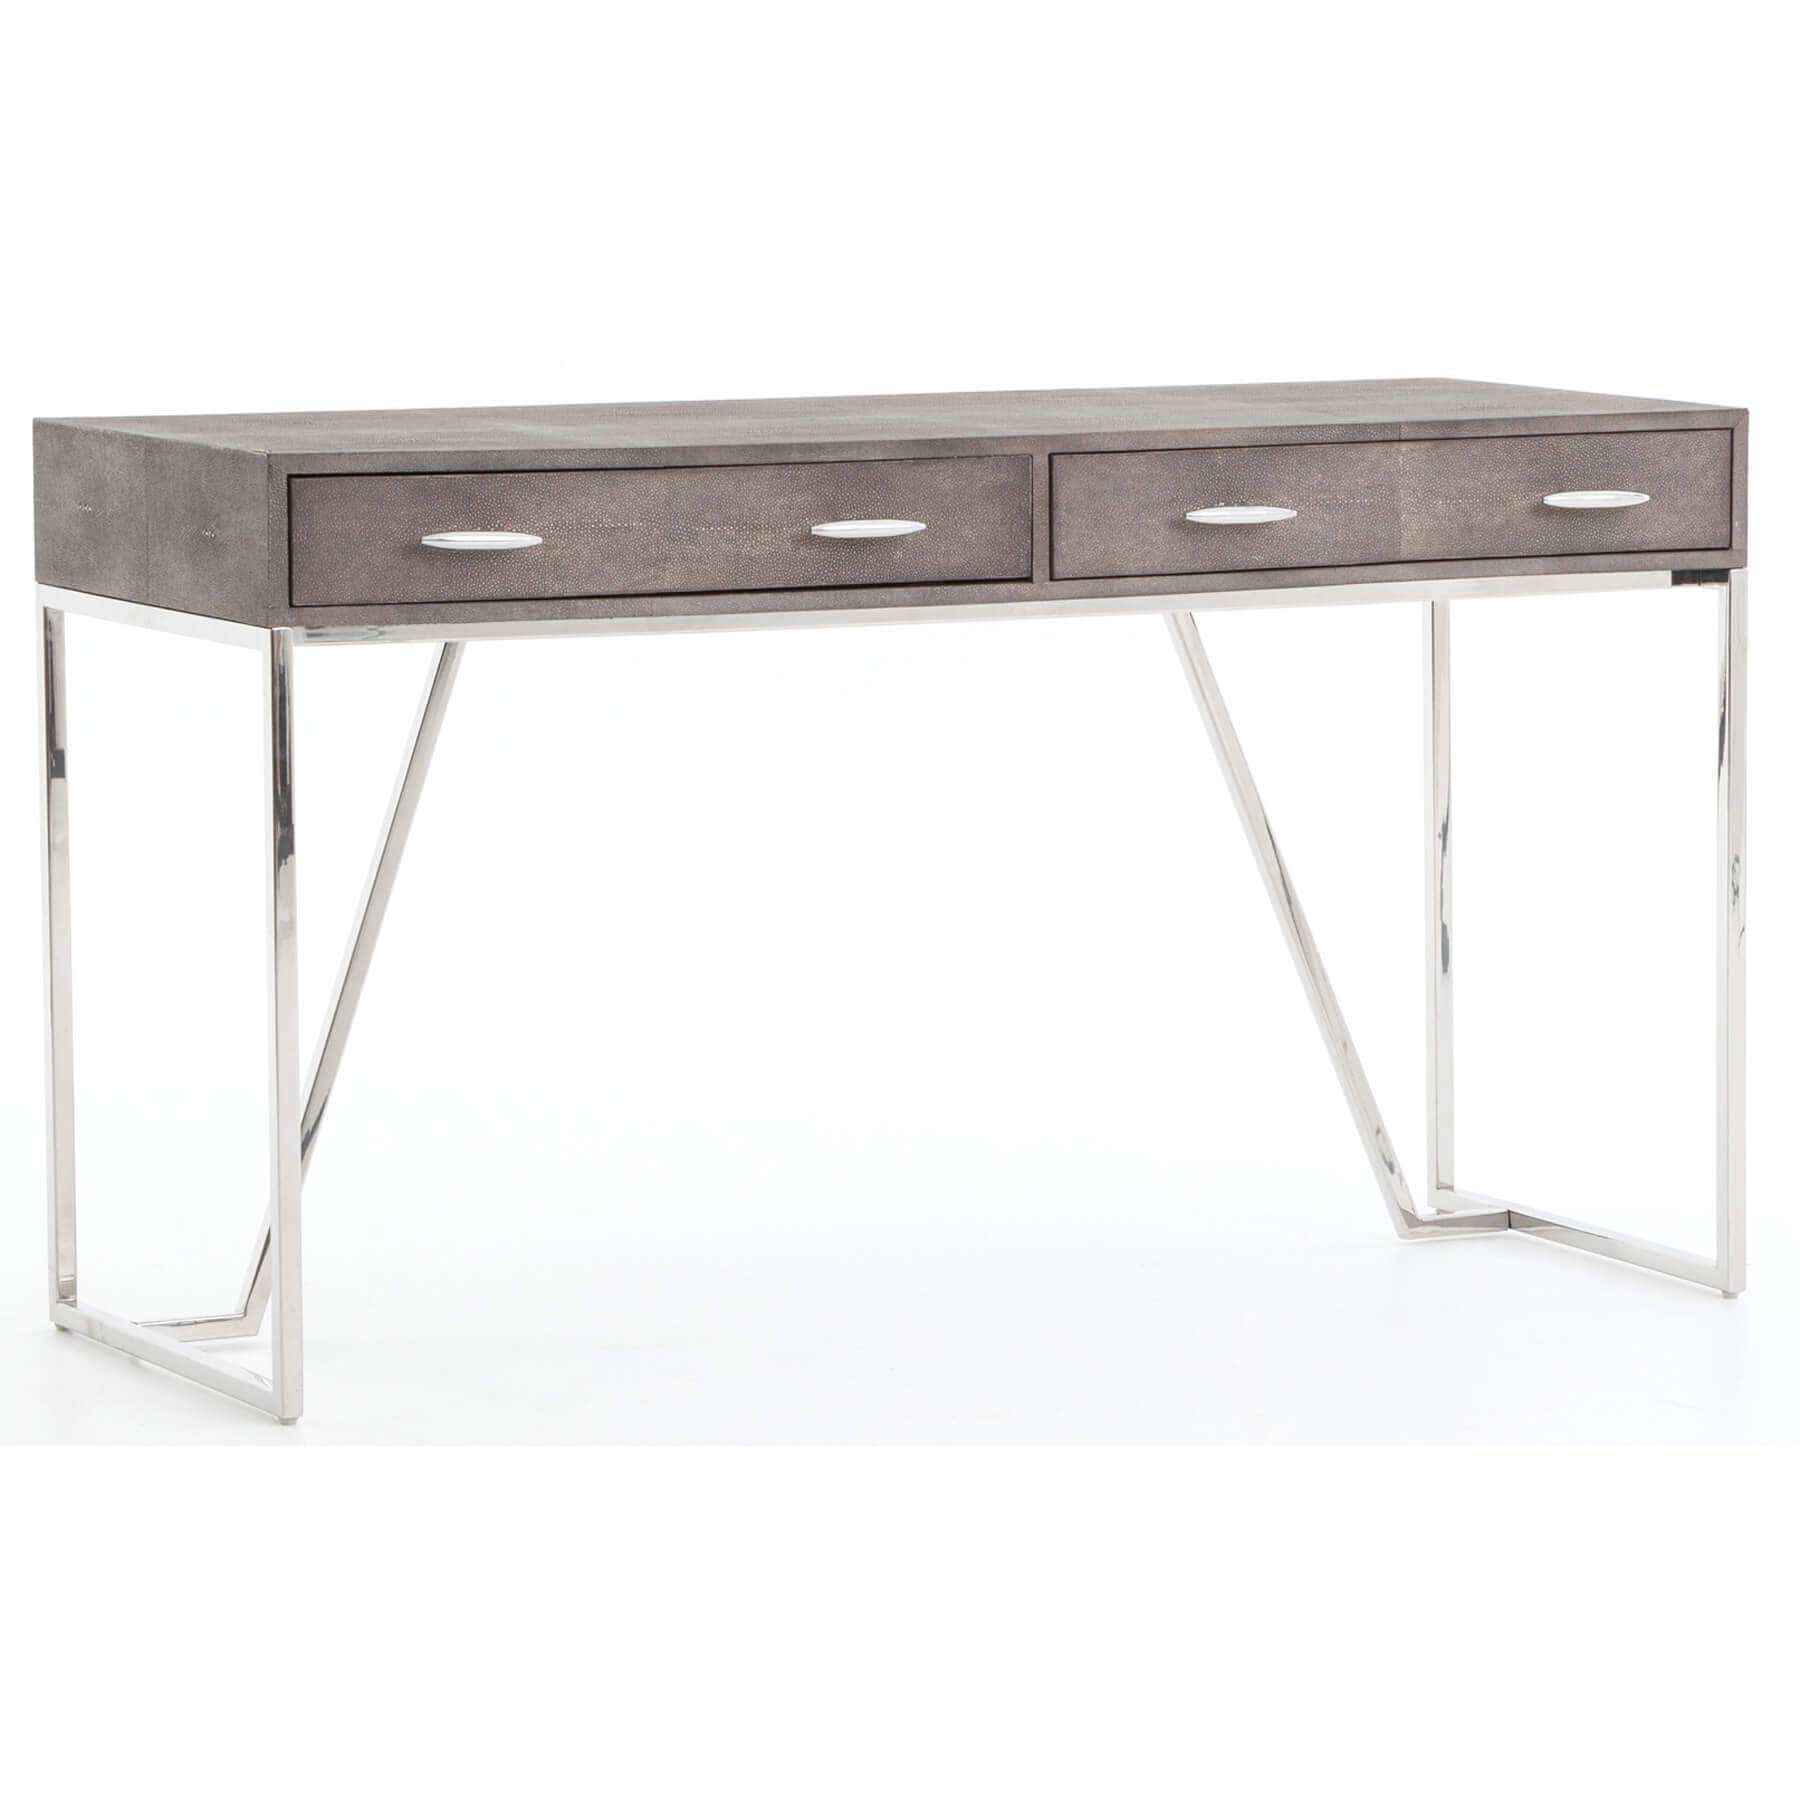 Shagreen Desk Stainless High Fashion Home